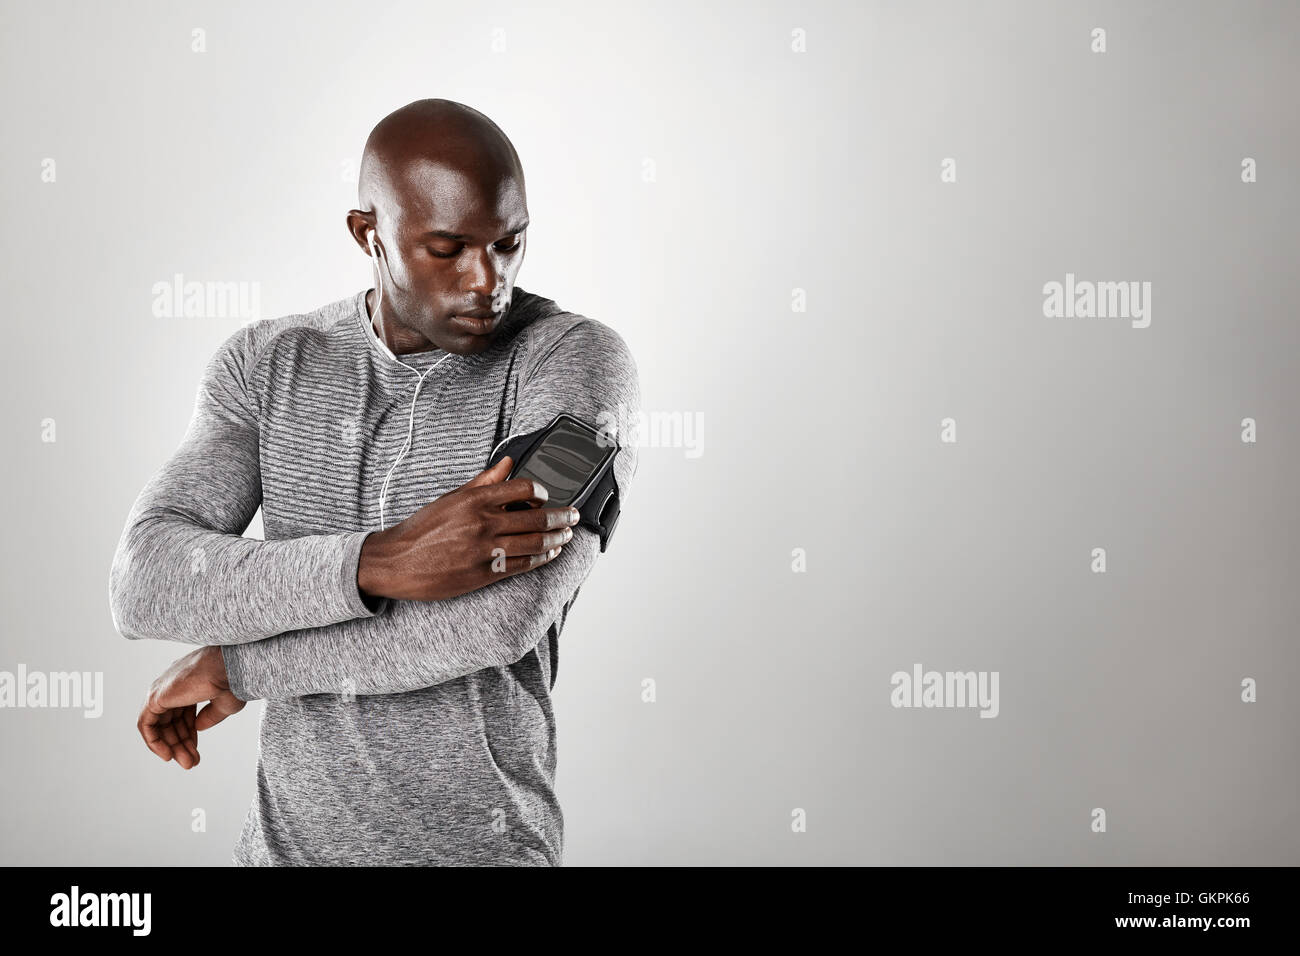 Studio shot of african muscular man listening to music on mobile phone. Fit young man against grey background with copy space. Stock Photo